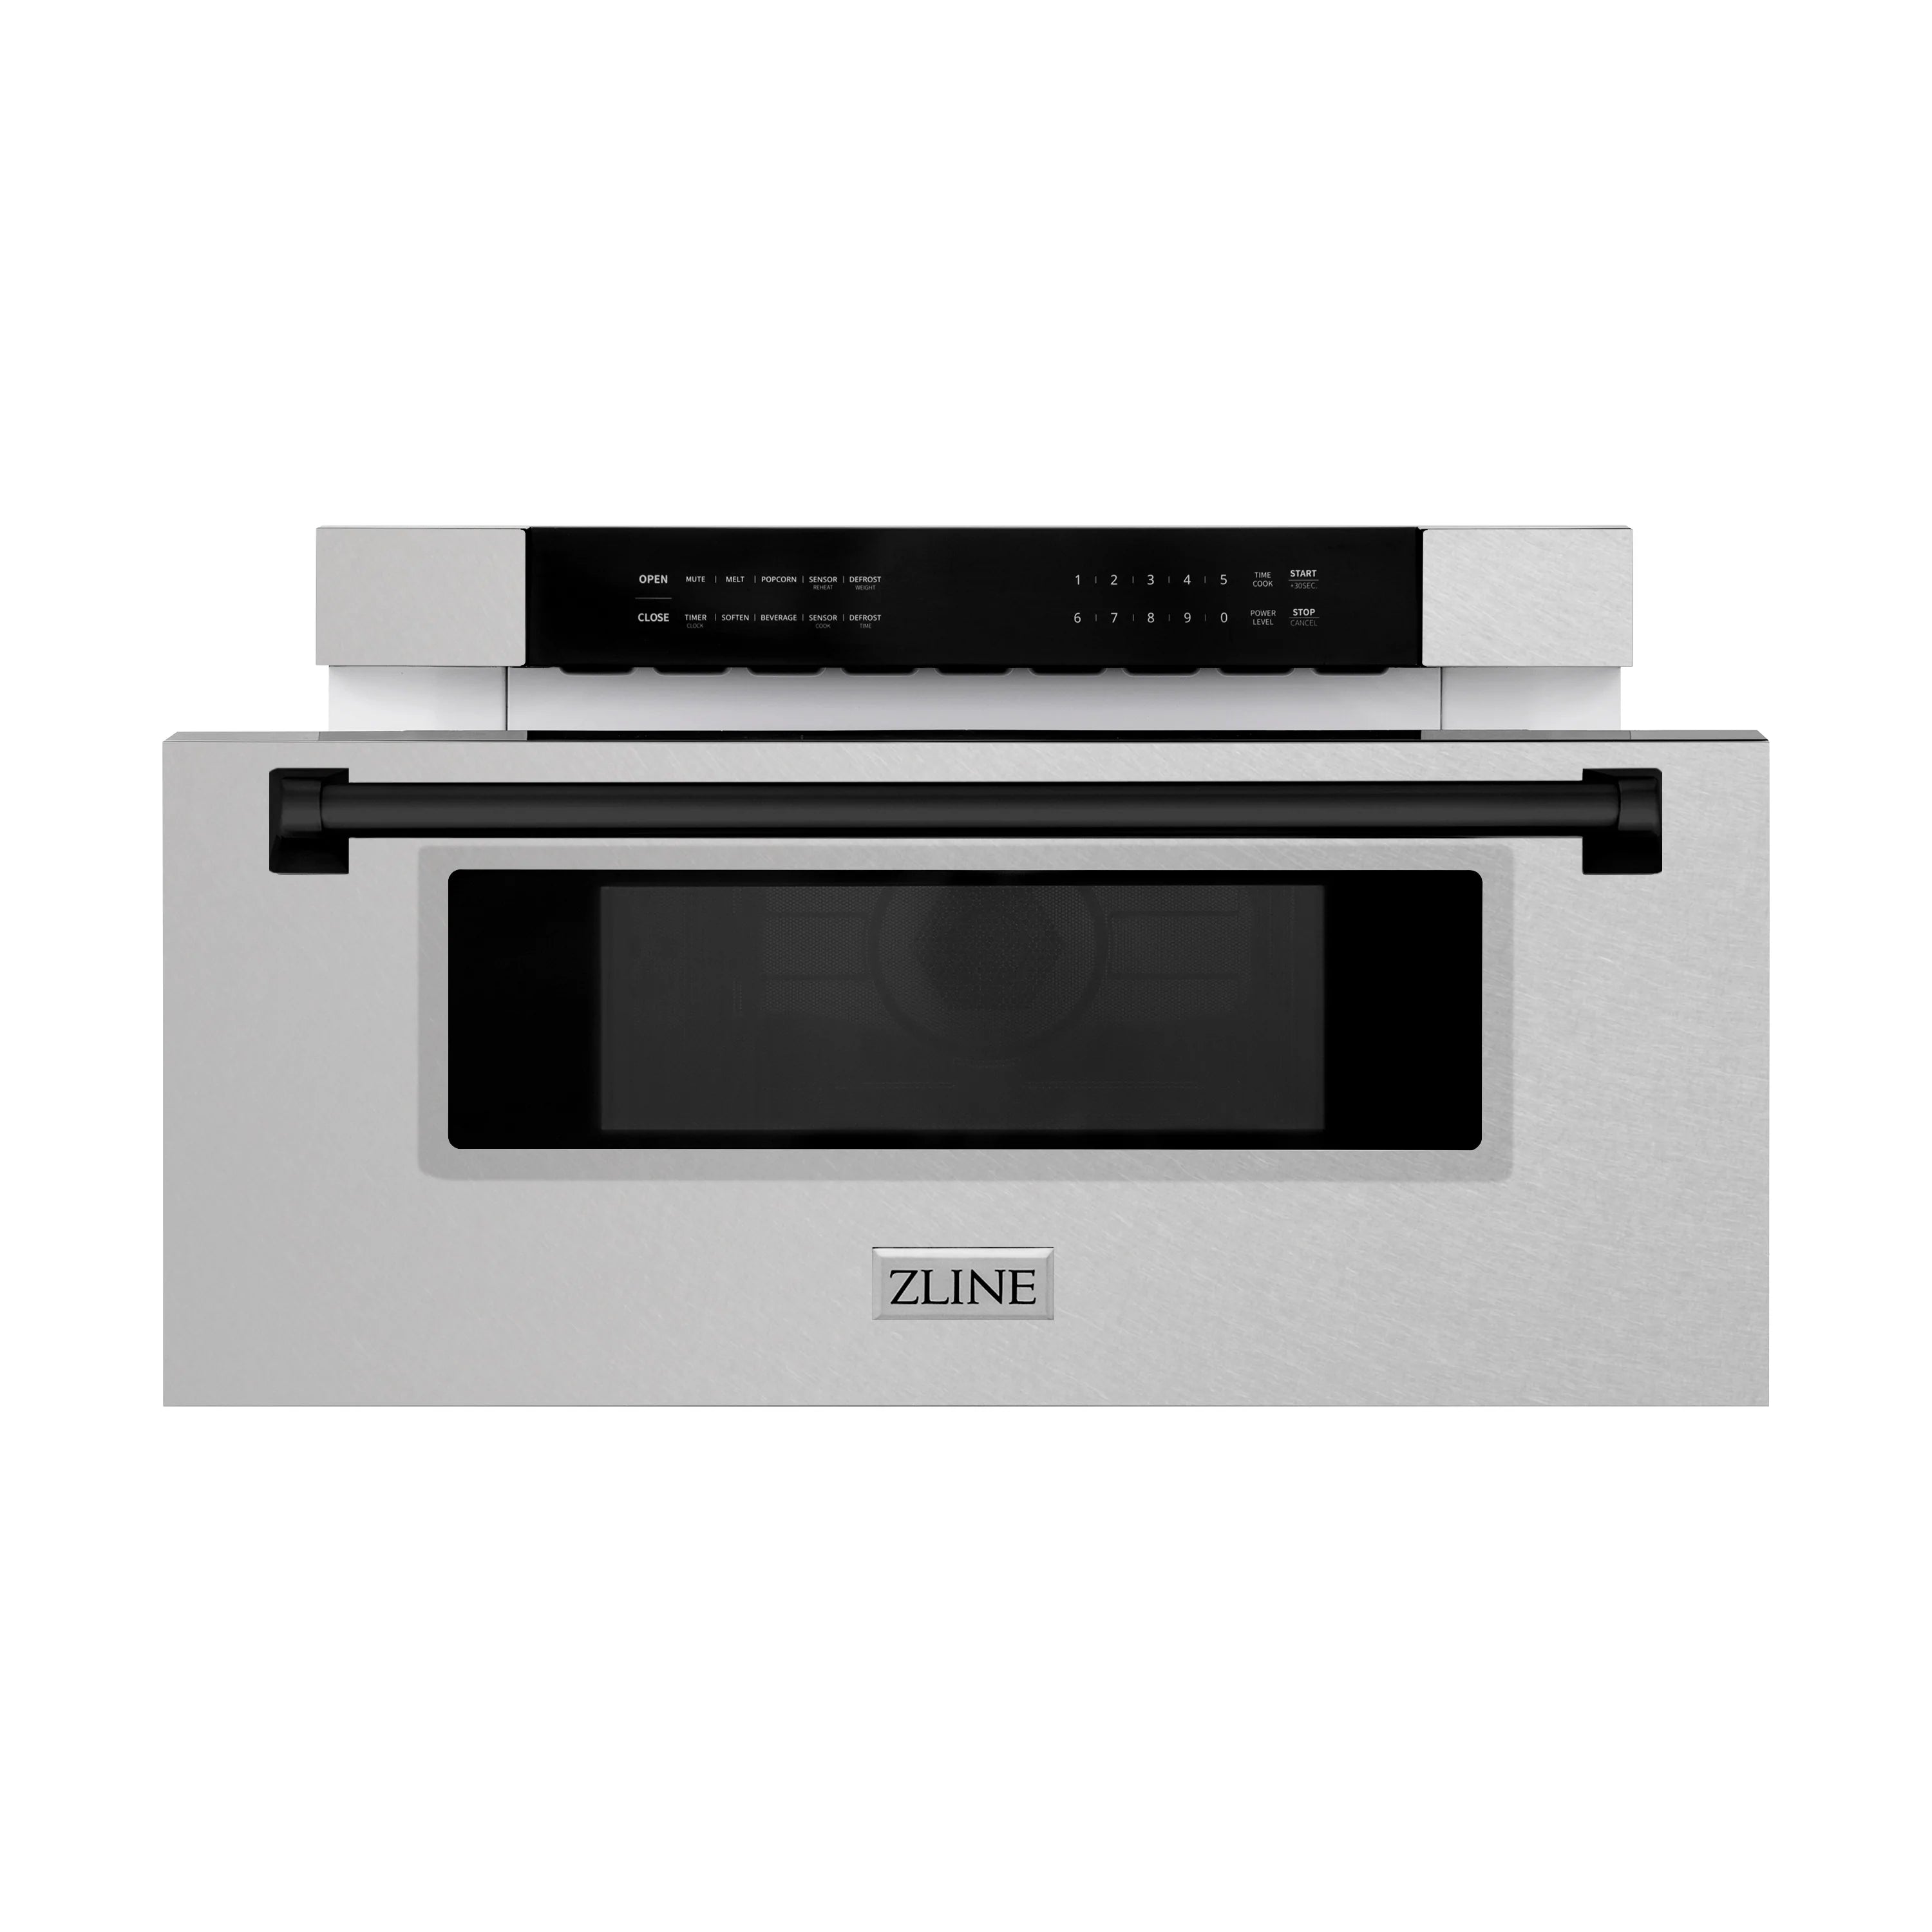 ZLINE Autograph Edition 30" 1.2 cu. ft. Built-In Microwave Drawer in Fingerprint Resistant Stainless Steel with Accents (MWDZ-30-SS)